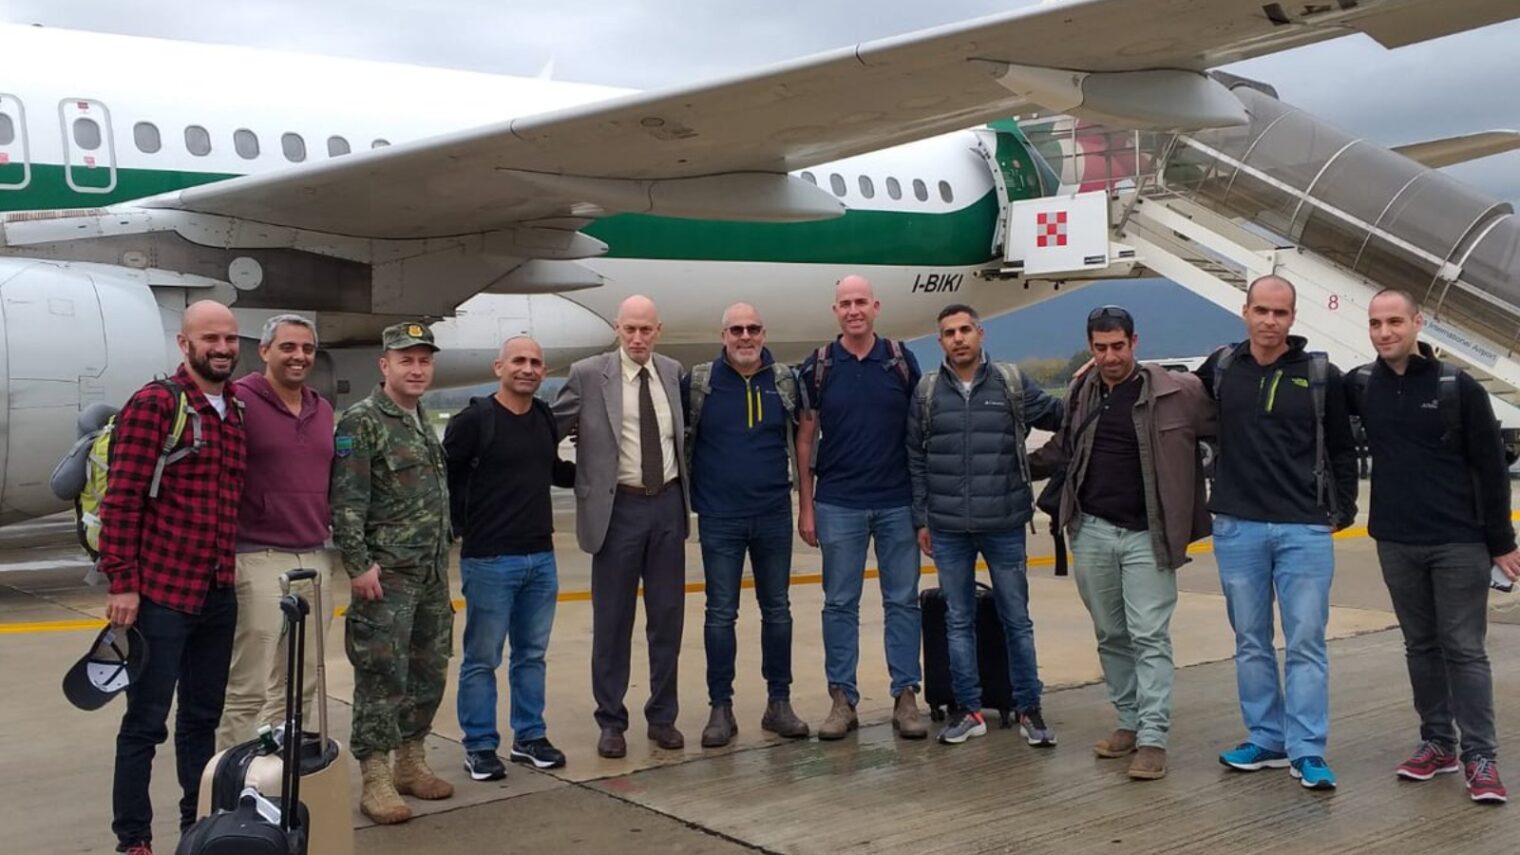 Members of the IDF aid mission to Albania leaving from Israel on December 3, 2019, with Ministry of Foreign Affairs Director General Yuval Rotem (in suit and tie). Photo via Twitter